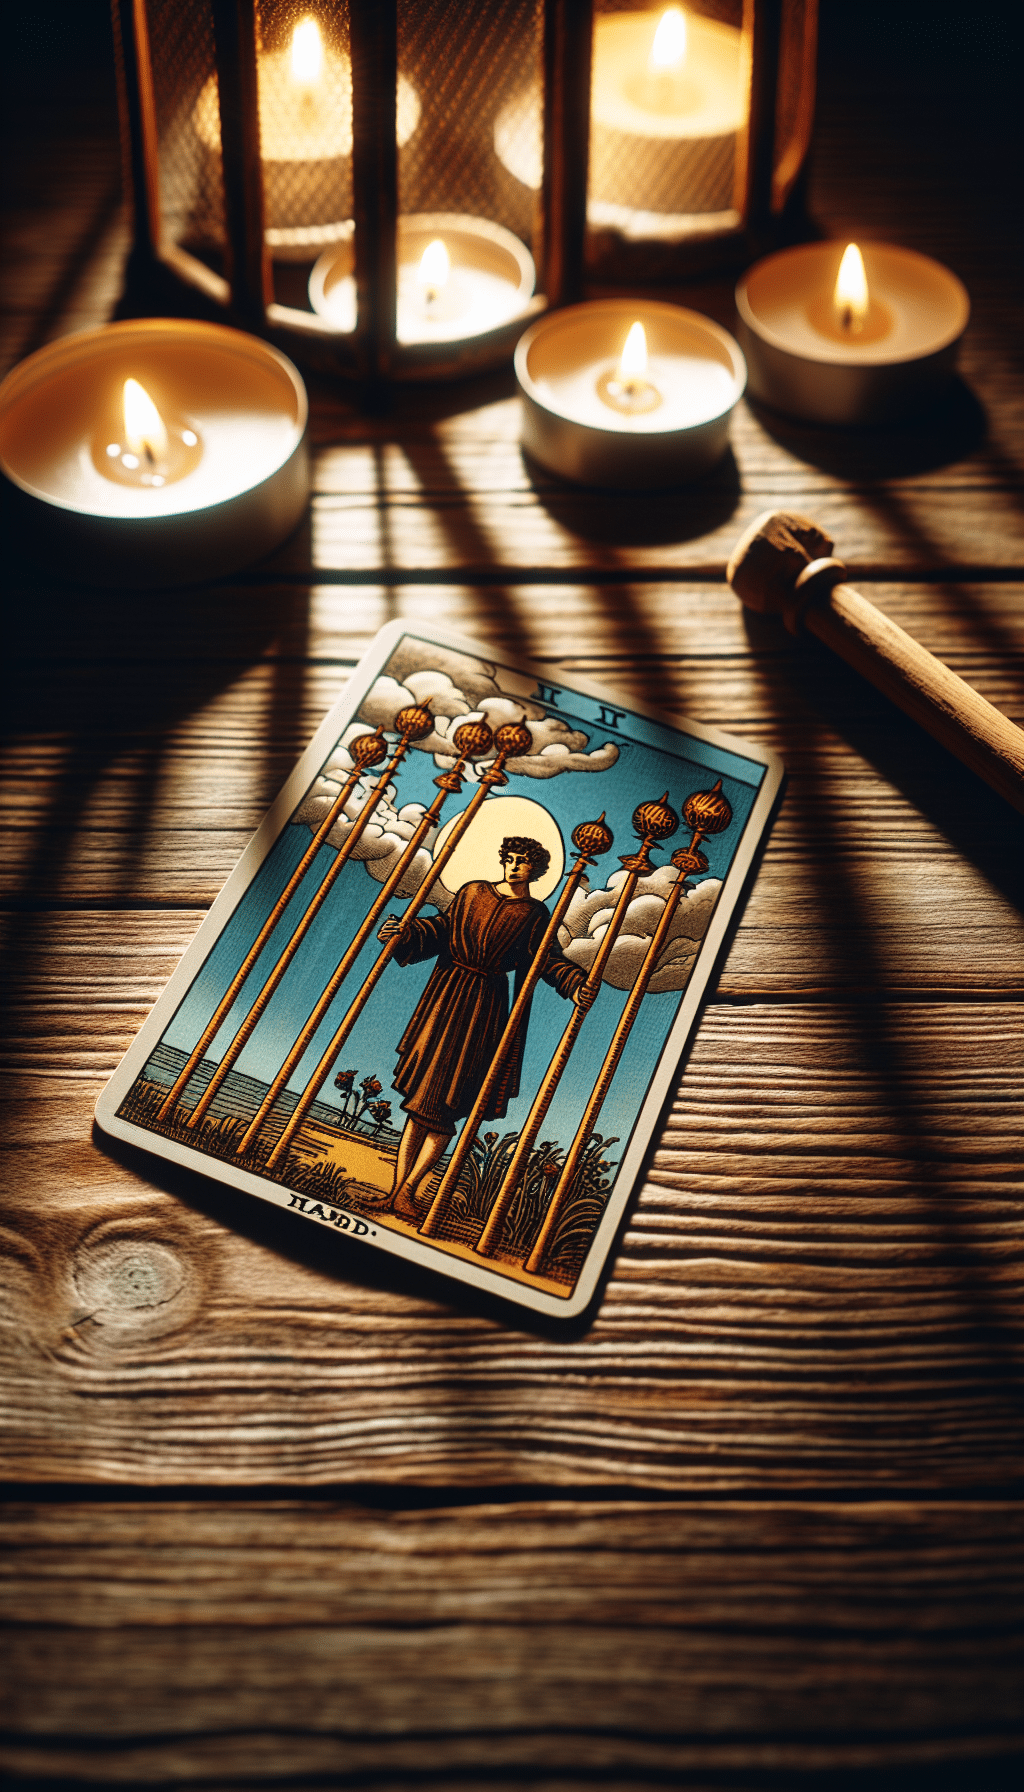 Nine of Wands: Overcoming Health Challenges Through Resilience